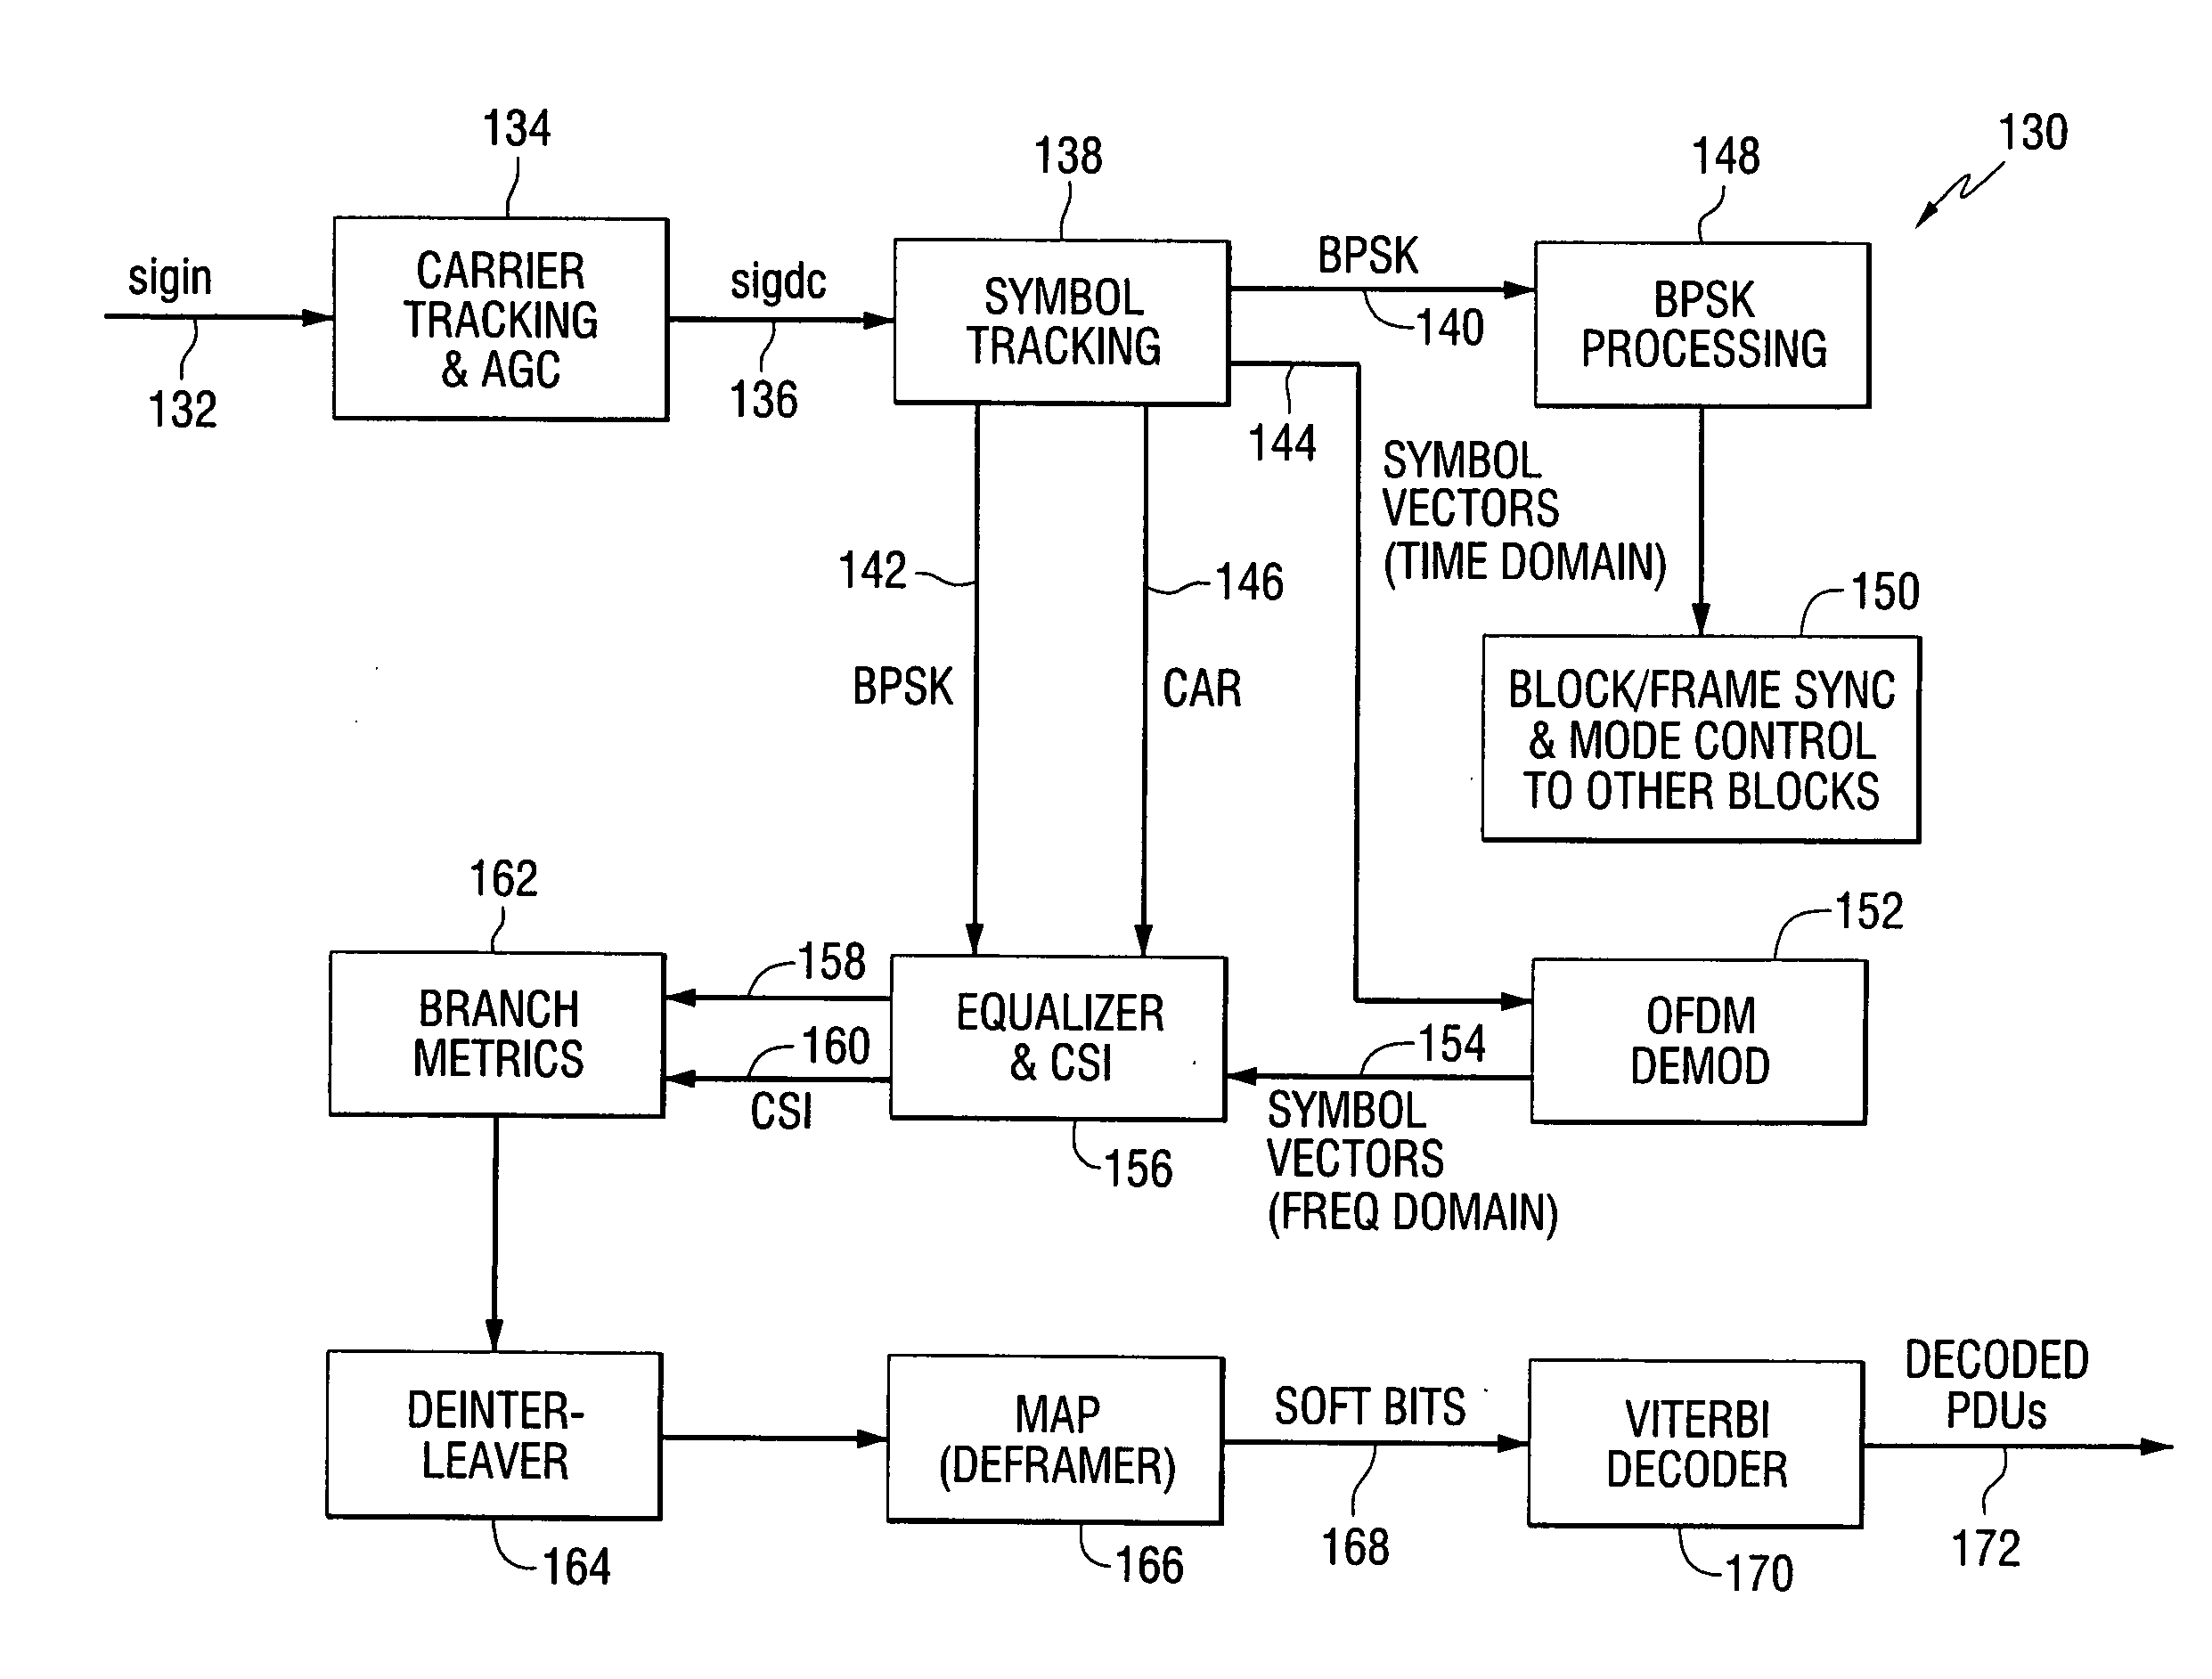 Carrier tracking for AM in-band on-channel radio receivers